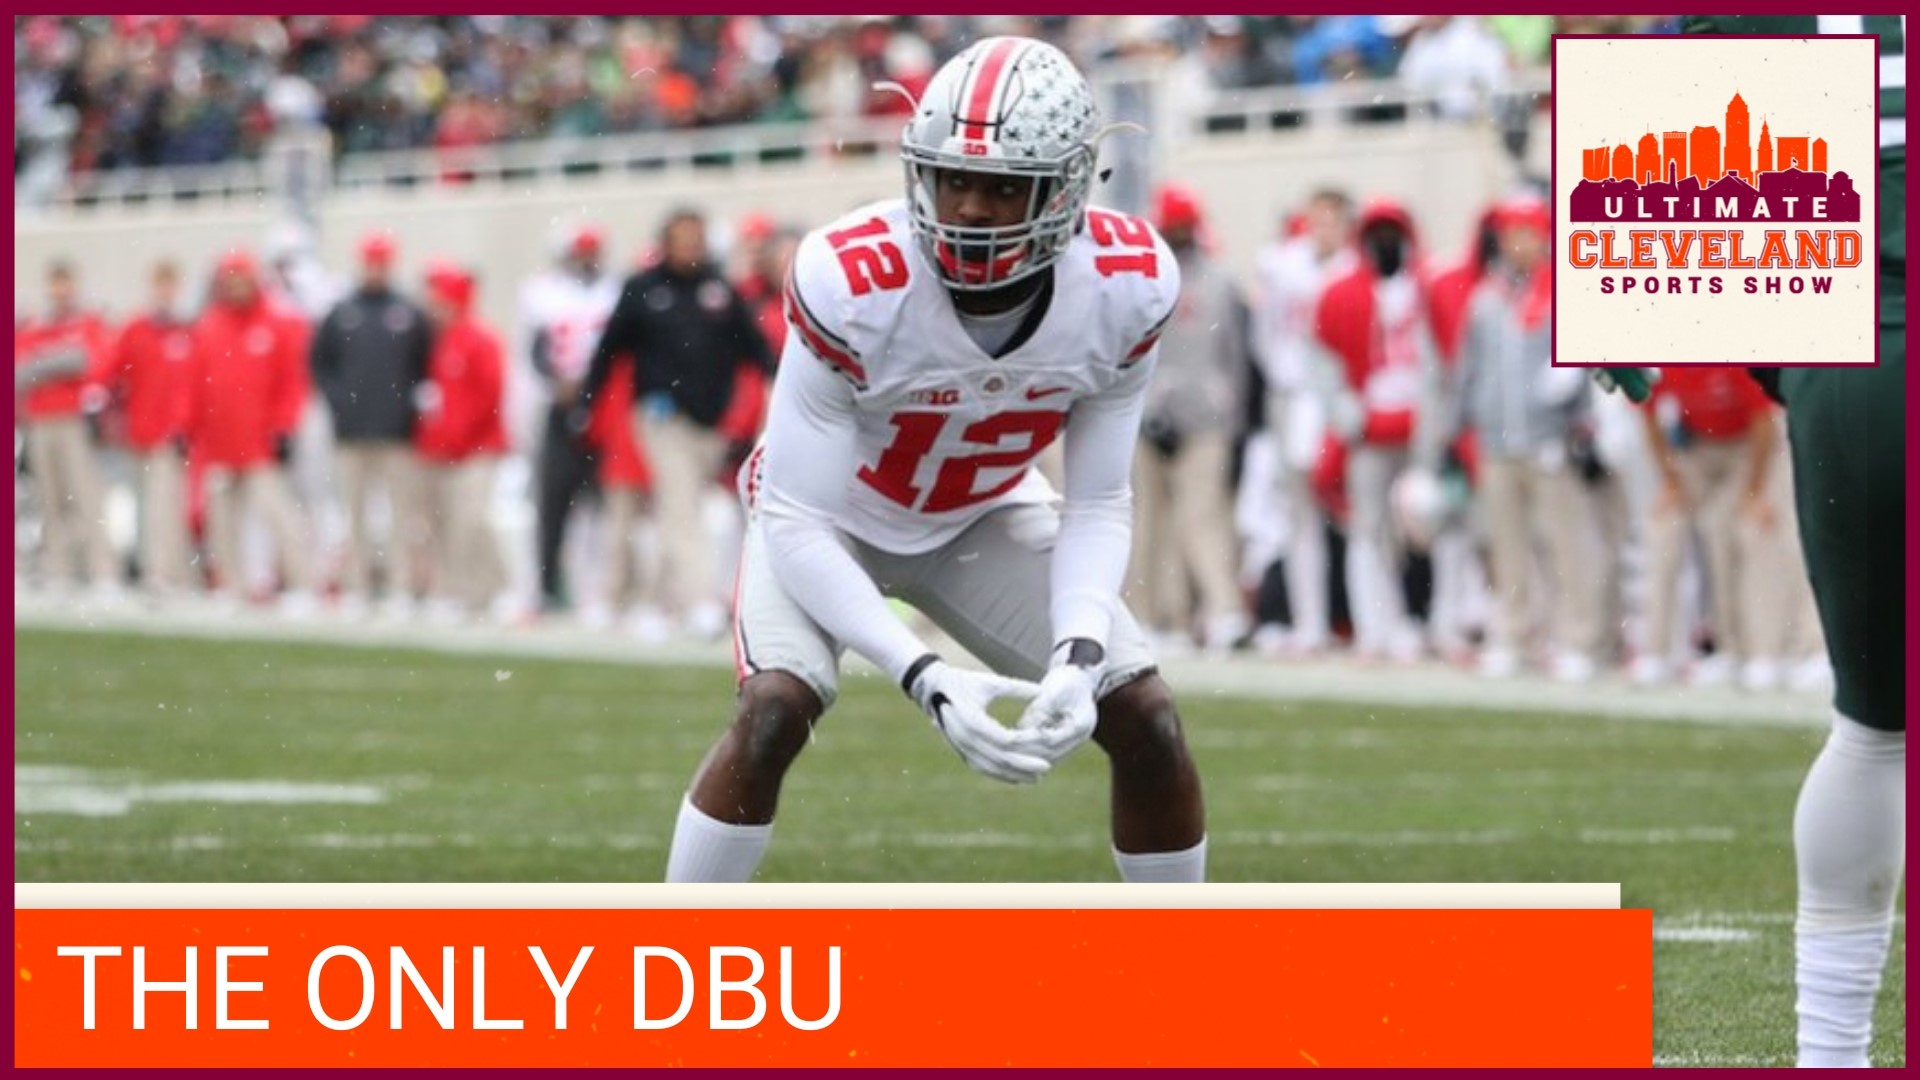 Ohio State is DBU! A new ESPN article confirms what we all knew - no program produces more DB talent than the Buckeyes.